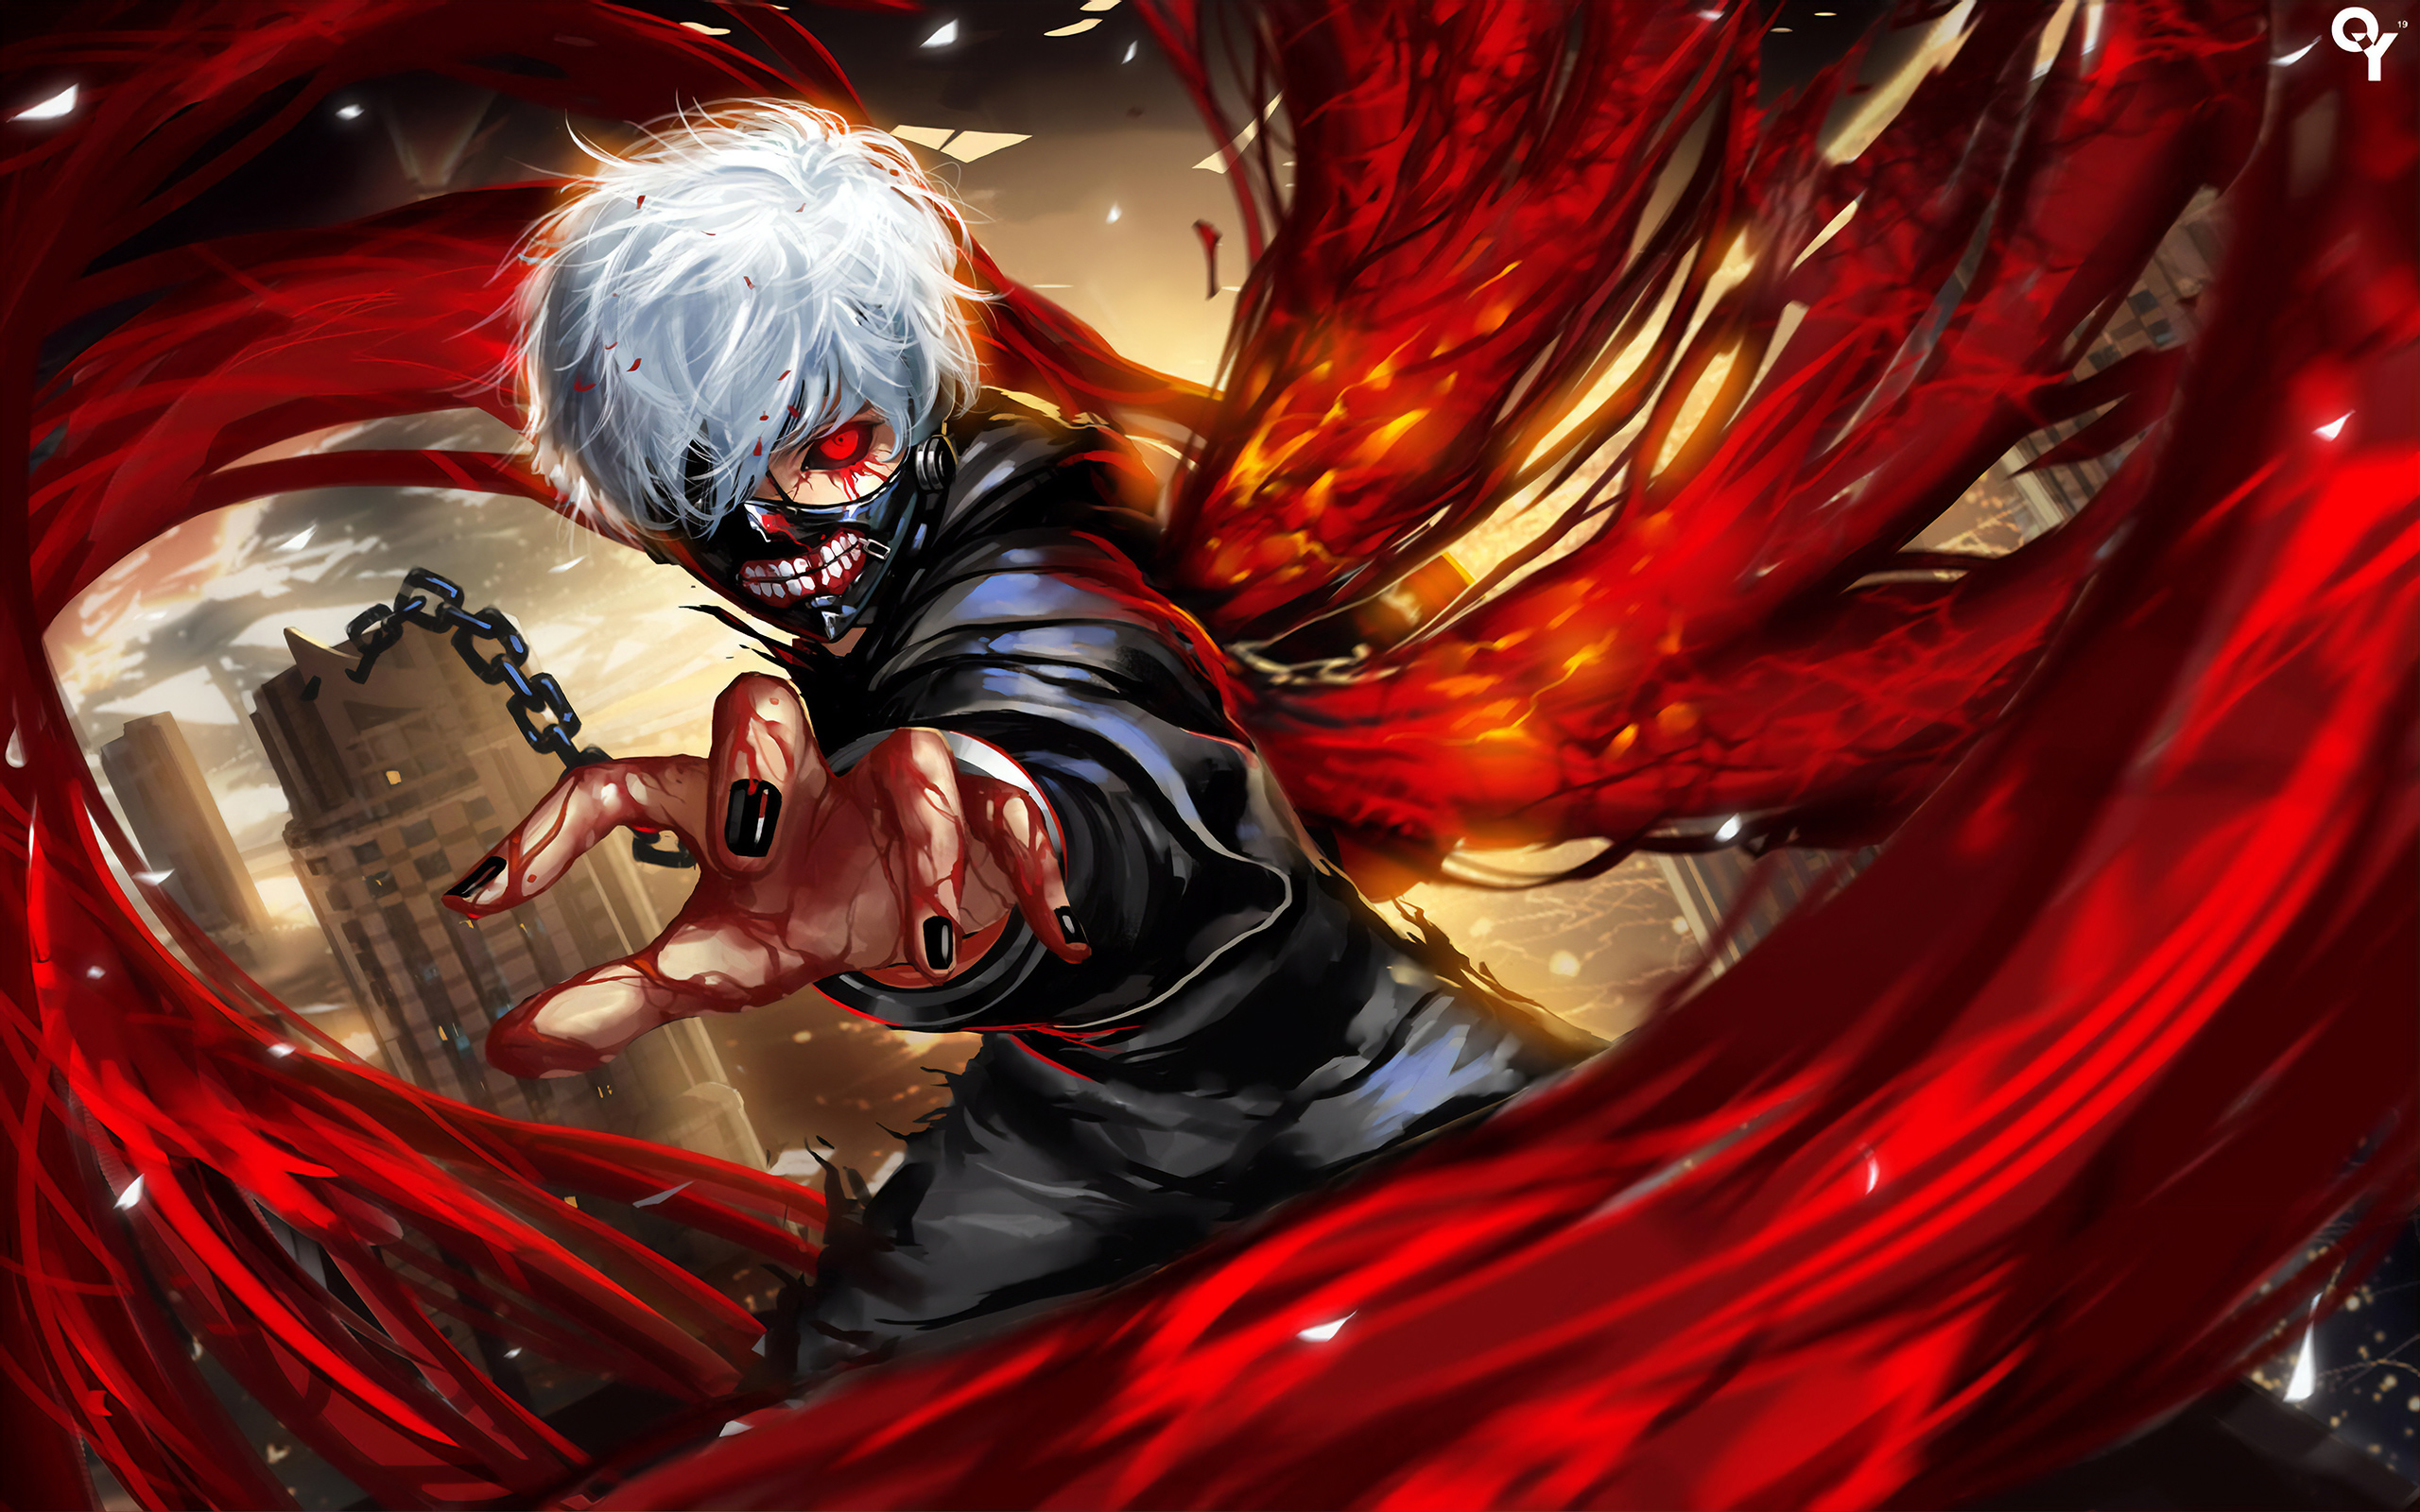 Tokyo Ghoul Android 4k Wallpapers - Wallpaper Cave